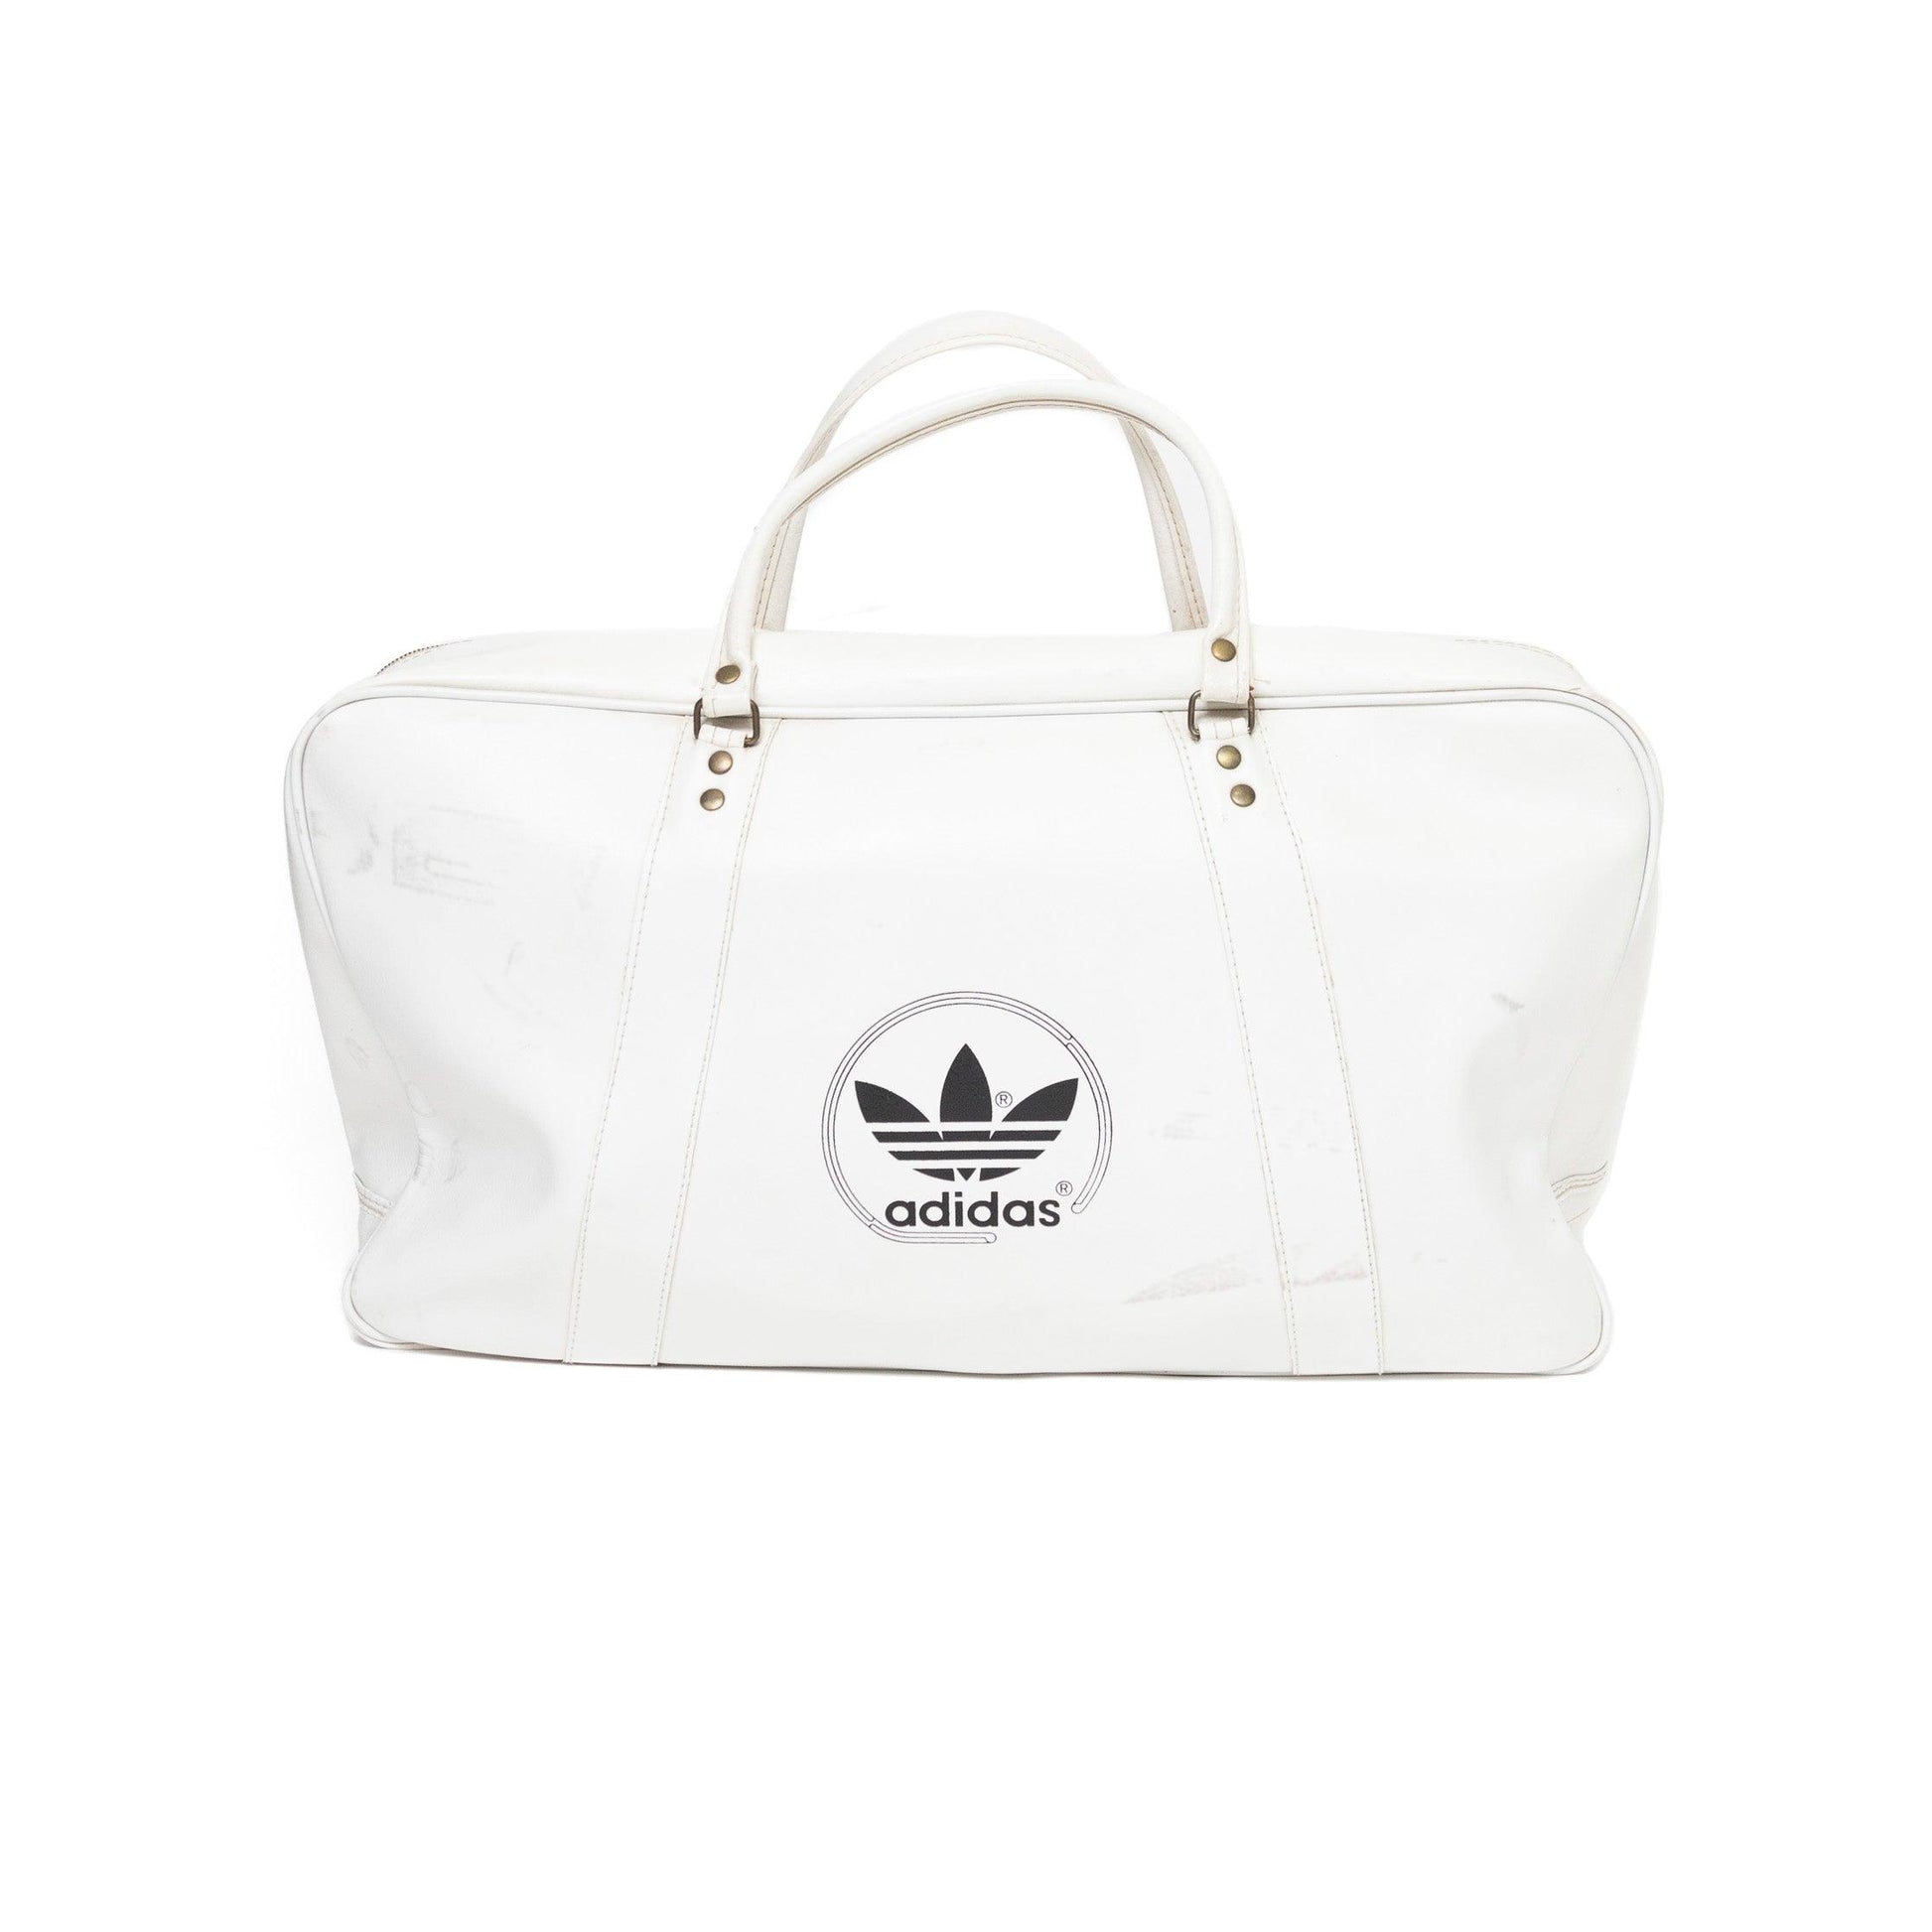 Adidas 1970's Racquet Bag - Known Source